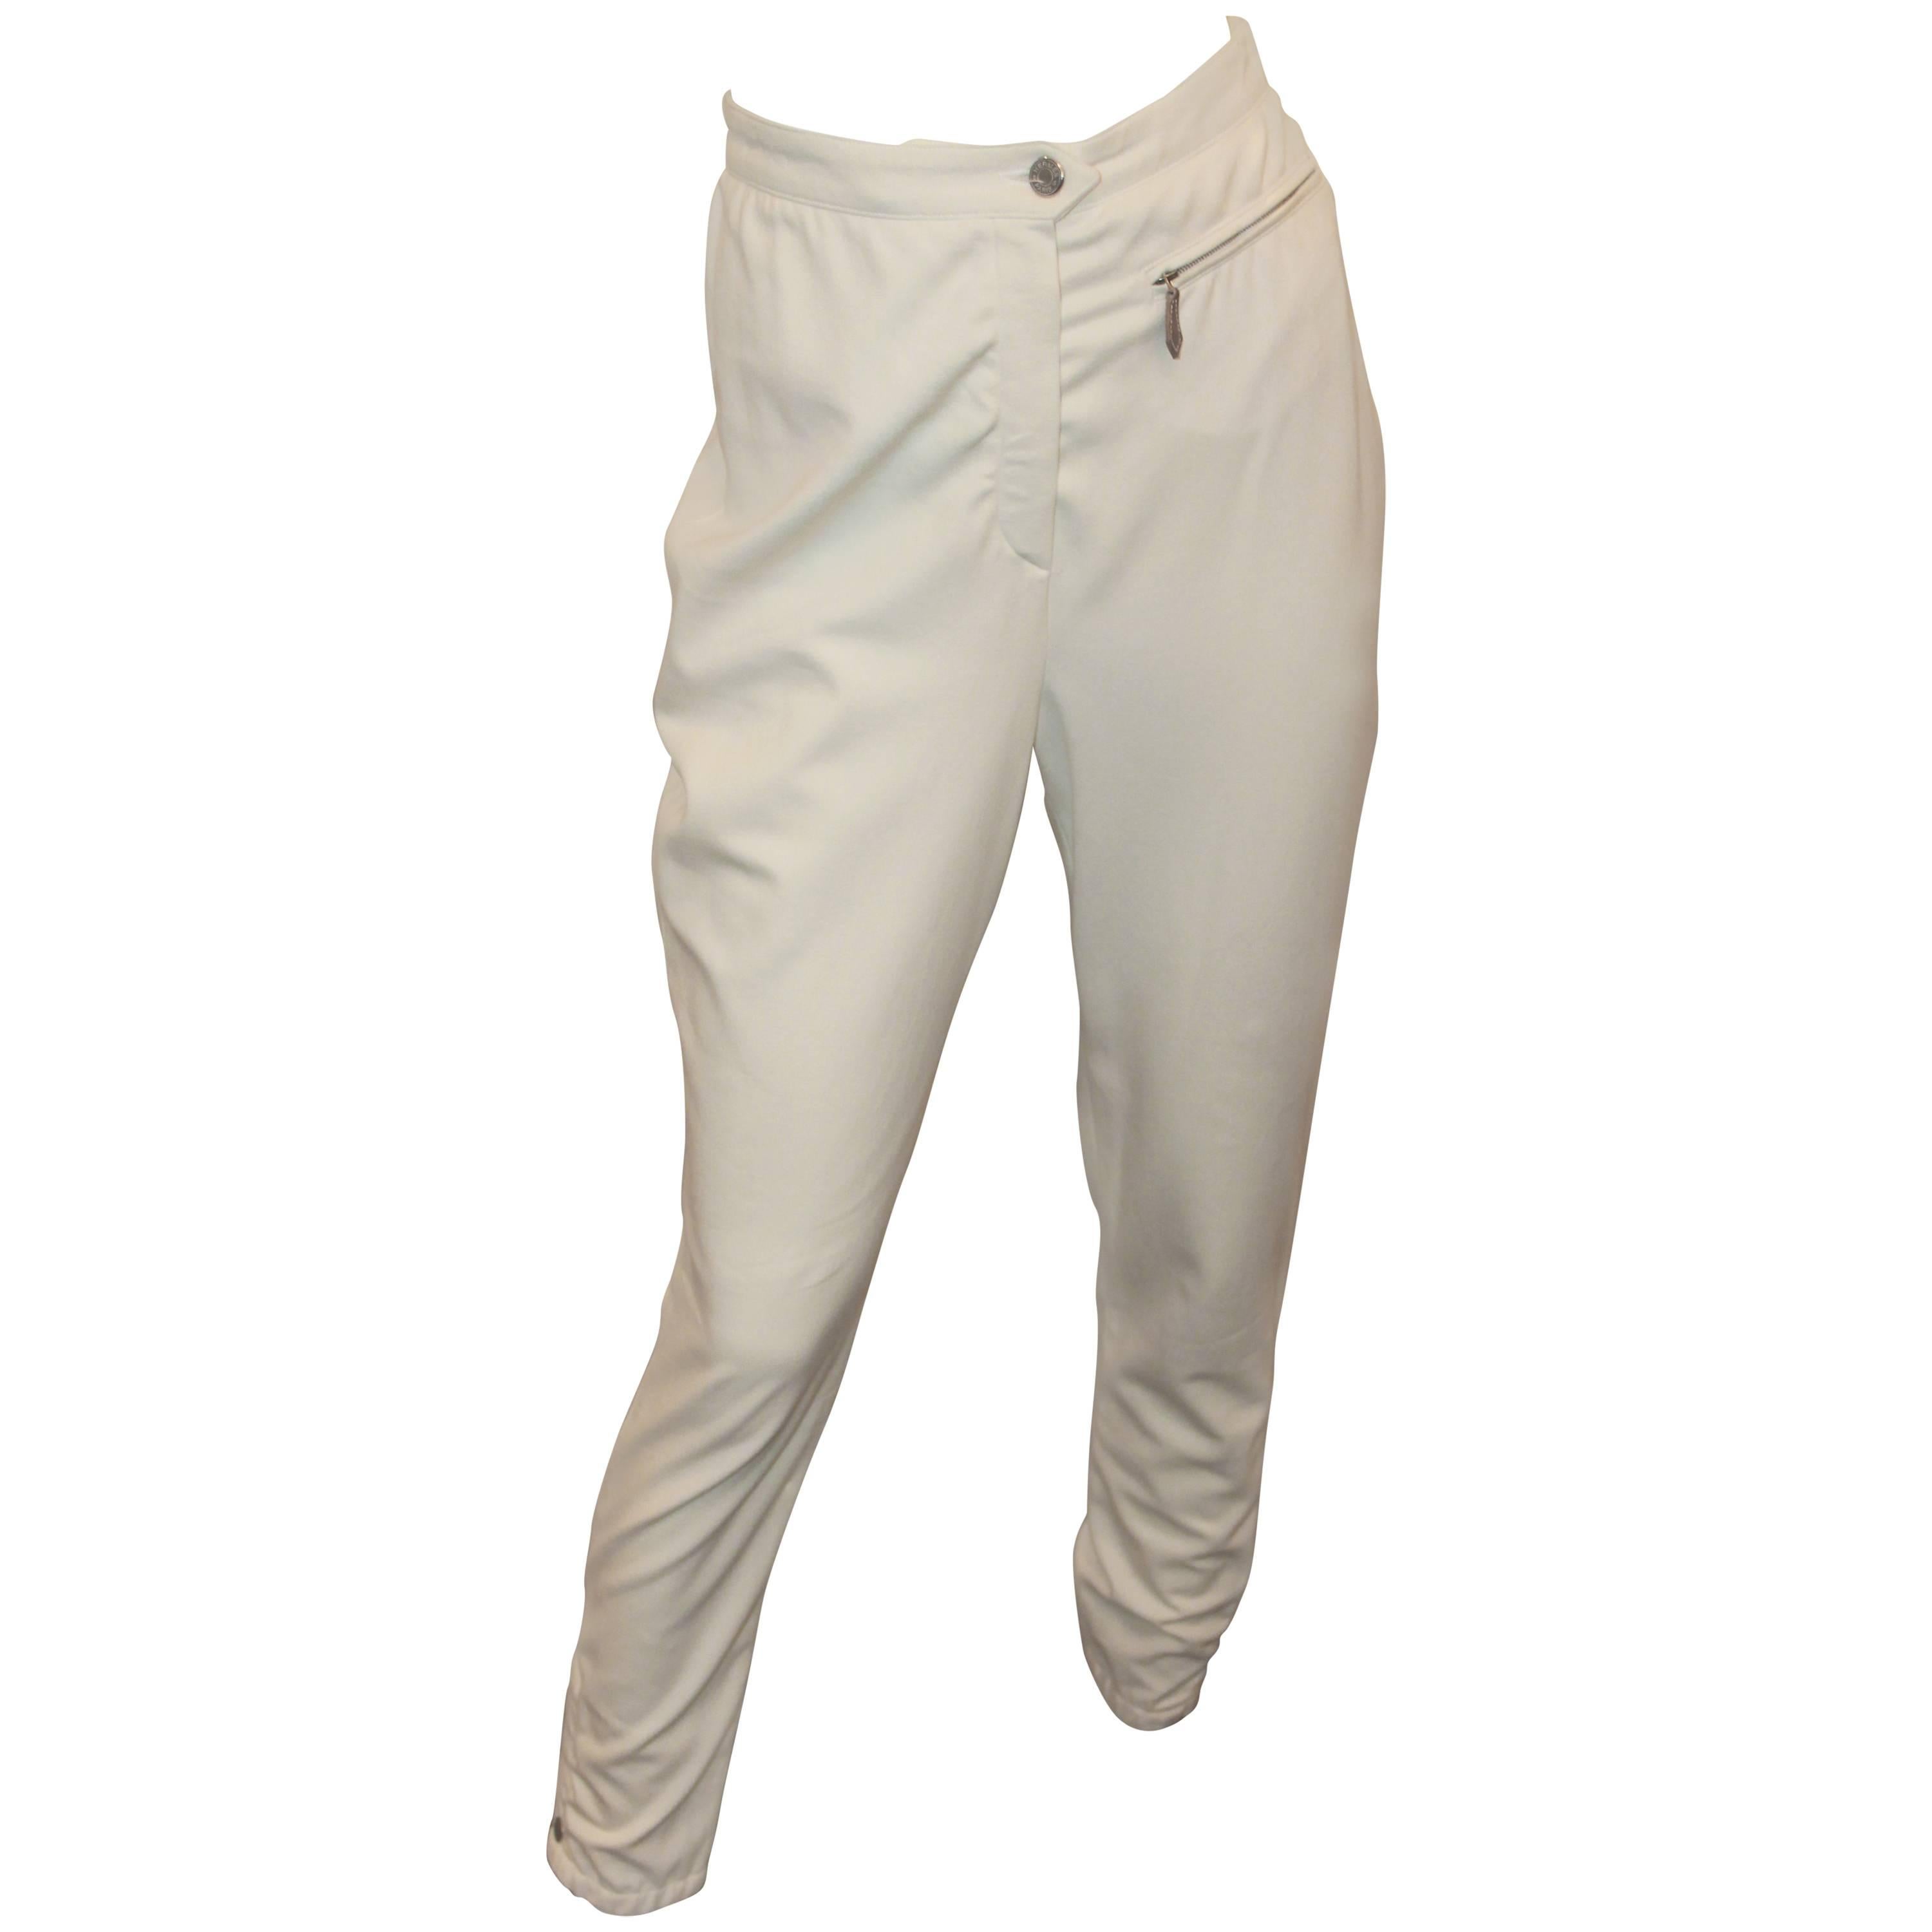 Hermes Vintage Ivory High Waisted Riding Pants - 34 - circa 1990's For Sale